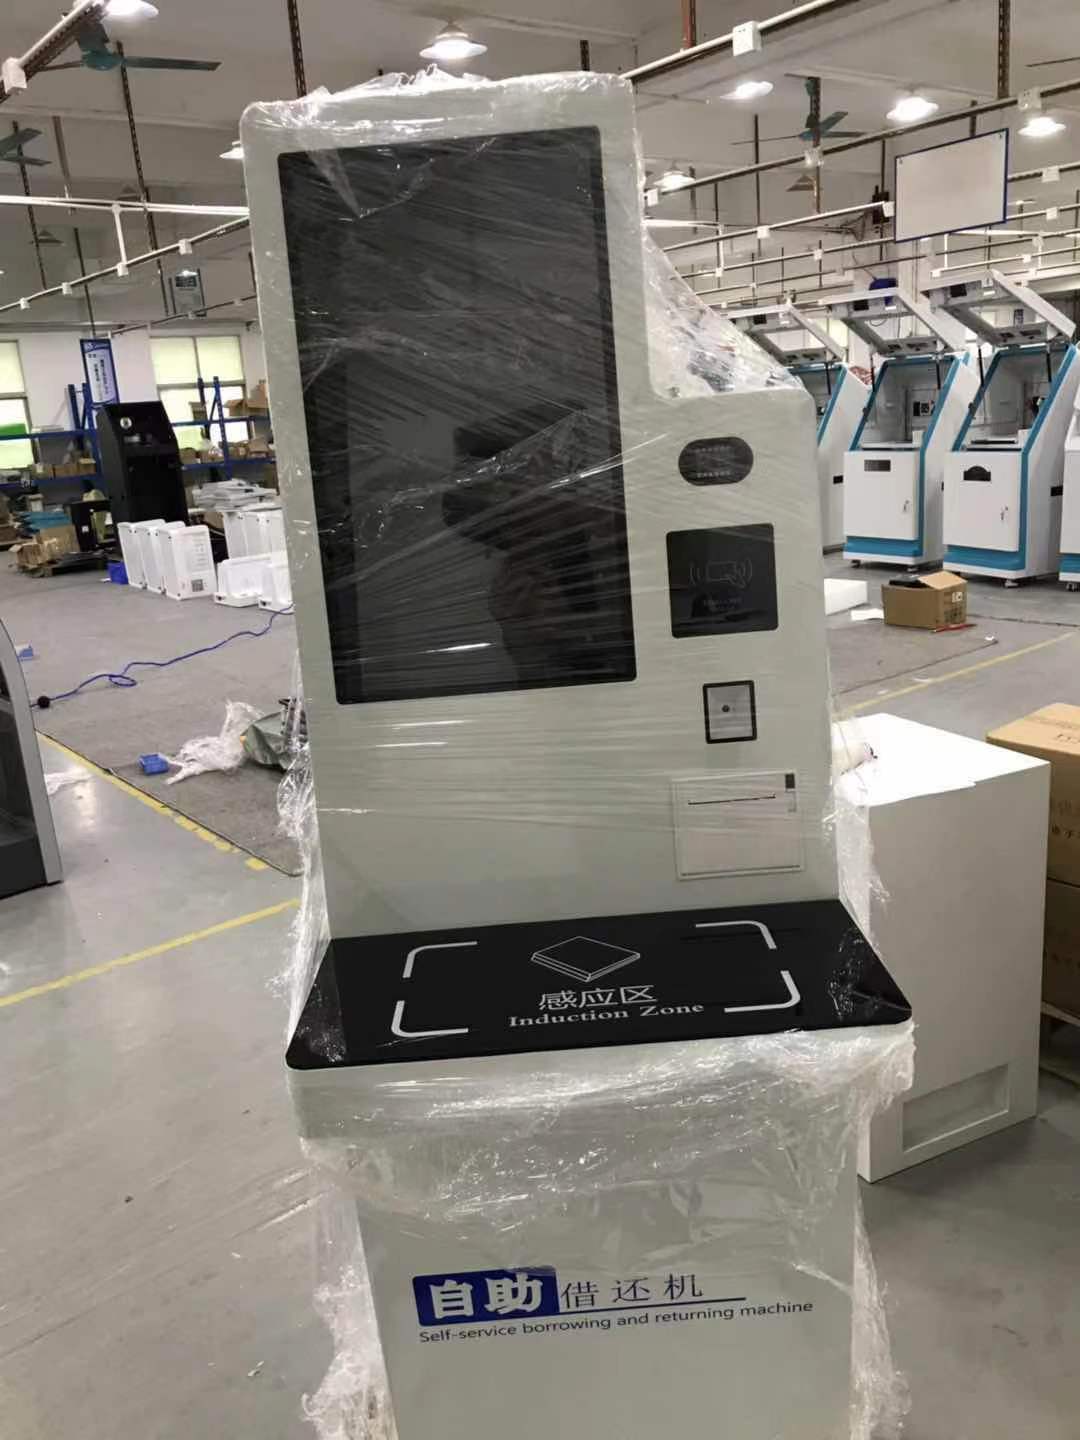 Self service self check library systems ready to ship